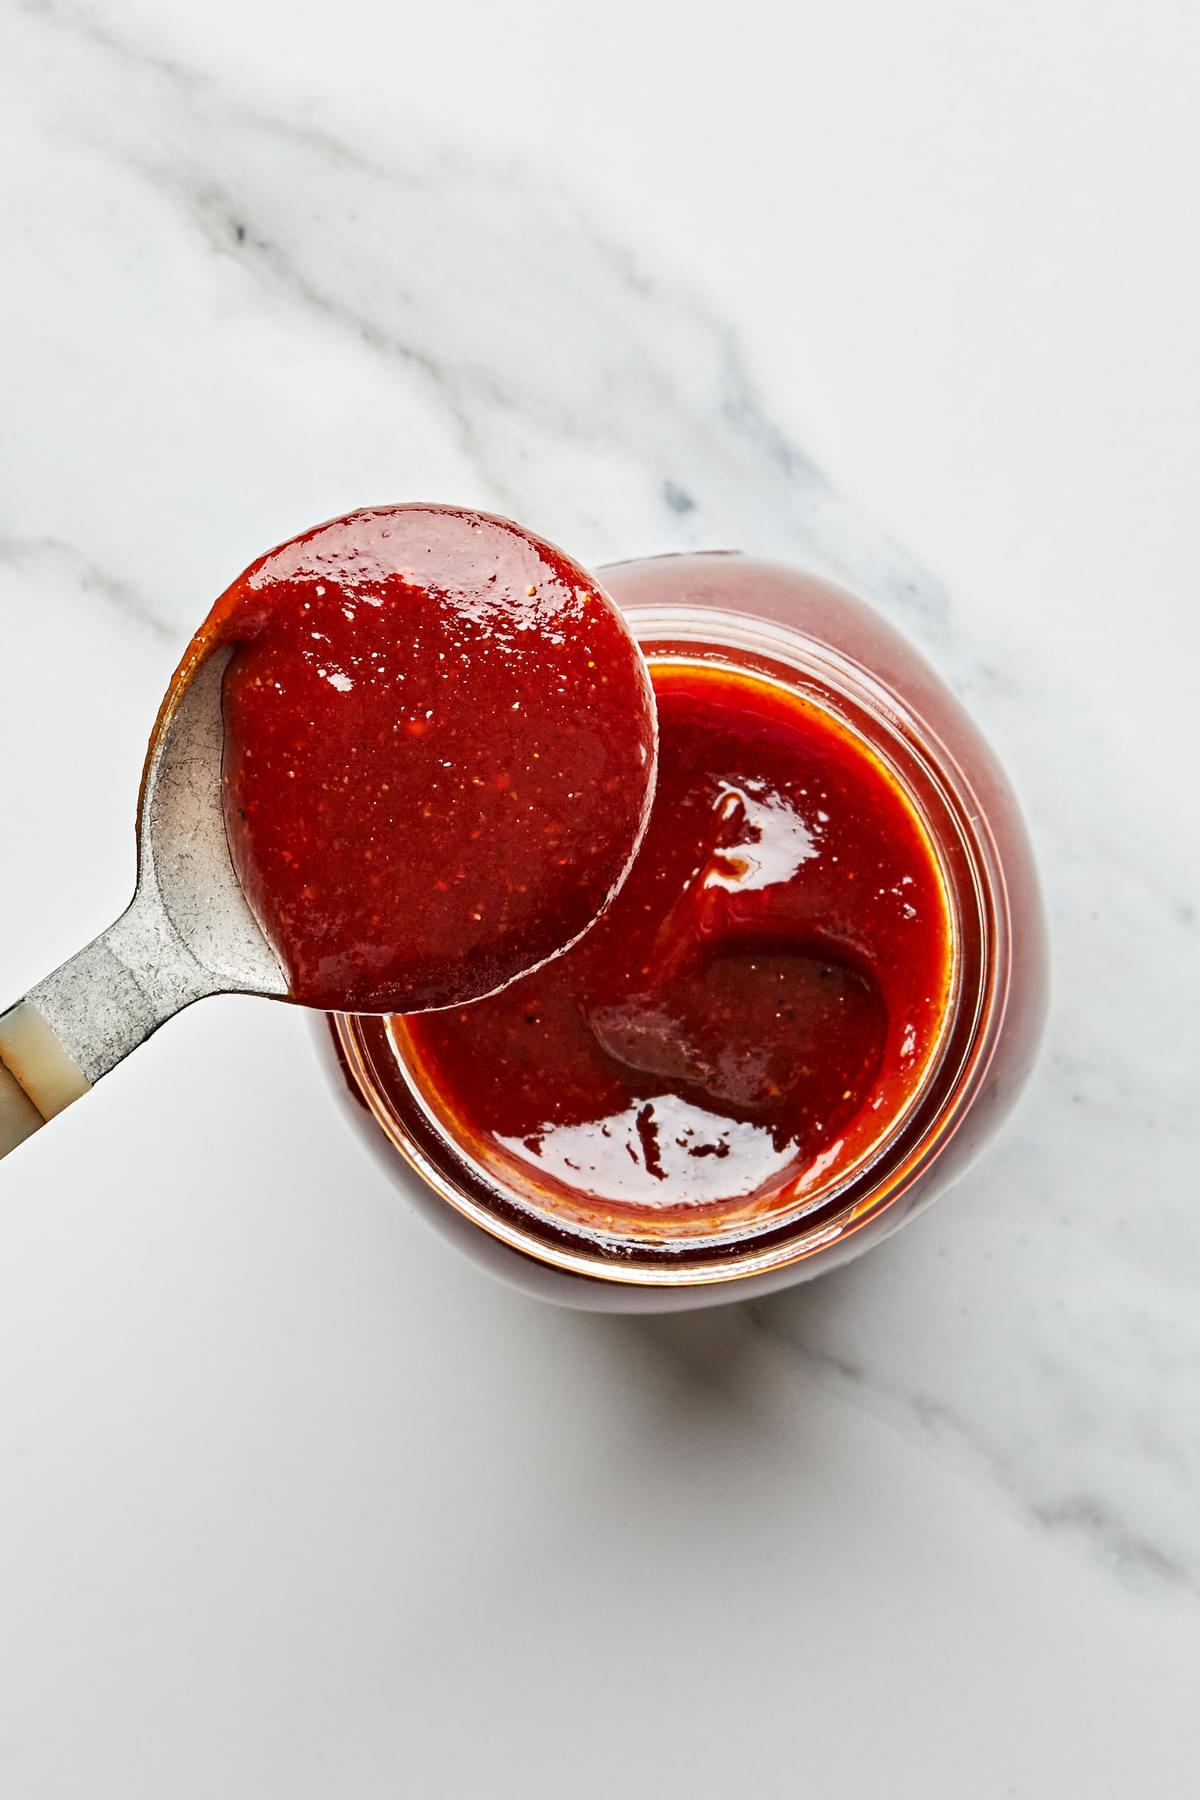 homemade bbq sauce being scooped out of a glass jar